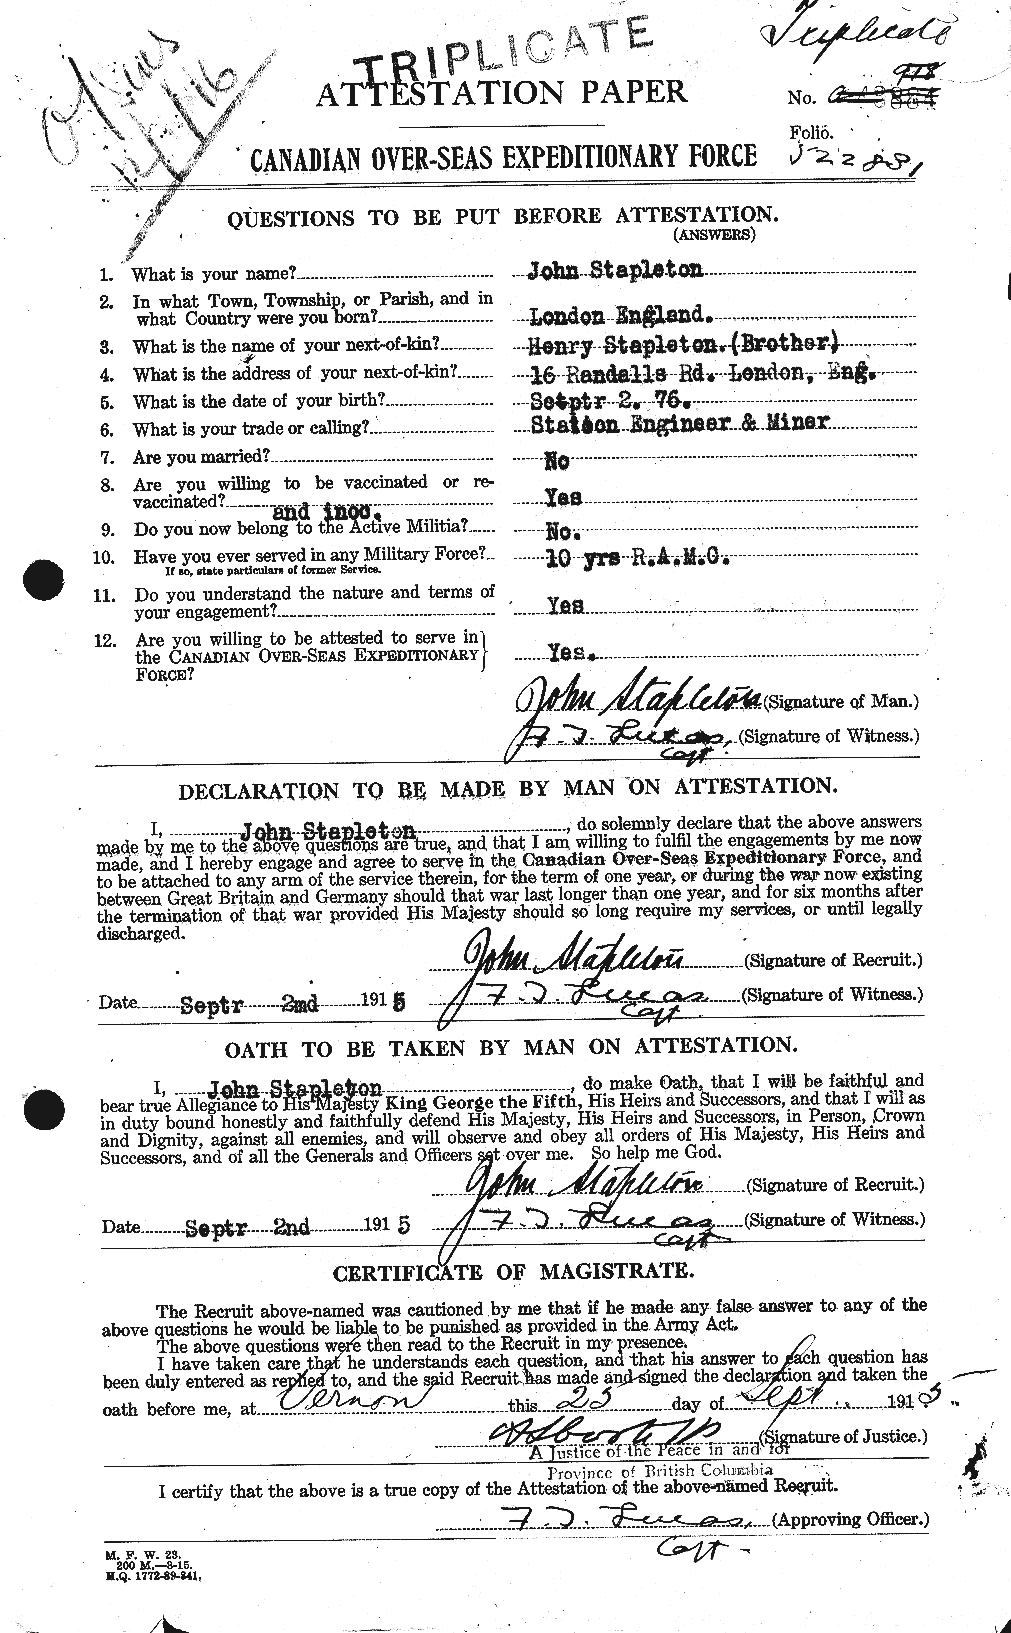 Personnel Records of the First World War - CEF 113821a